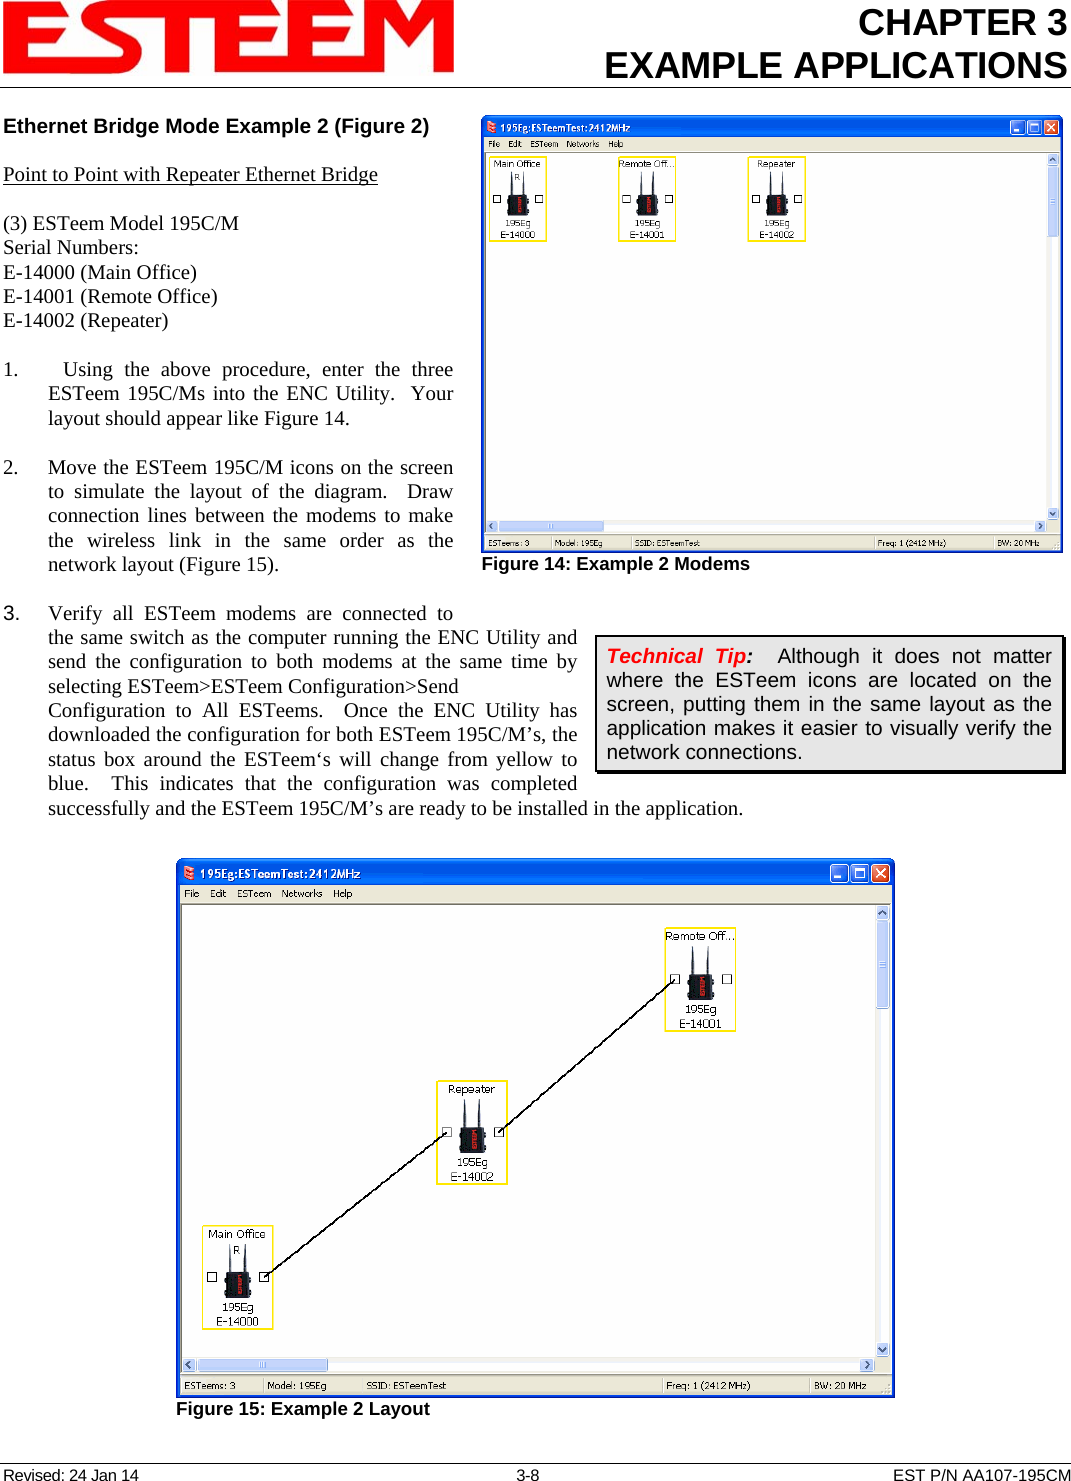 CHAPTER 3 EXAMPLE APPLICATIONS  Ethernet Bridge Mode Example 2 (Figure 2) Revised: 24 Jan 14  3-8  EST P/N AA107-195CM  Point to Point with Repeater Ethernet Bridge  (3) ESTeem Model 195C/M Serial Numbers: E-14000 (Main Office) E-14001 (Remote Office) E-14002 (Repeater)  1.    Using the above procedure, enter the three ESTeem 195C/Ms into the ENC Utility.  Your layout should appear like Figure 14.   2.    Move the ESTeem 195C/M icons on the screen to simulate the layout of the diagram.  Draw connection lines between the modems to make the wireless link in the same order as the network layout (Figure 15).  3.    Verify all ESTeem modems are connected to the same switch as the computer running the ENC Utility and send the configuration to both modems at the same time by selecting ESTeem&gt;ESTeem Configuration&gt;Send Configuration to All ESTeems.  Once the ENC Utility has downloaded the configuration for both ESTeem 195C/M’s, the status box around the ESTeem‘s will change from yellow to blue.  This indicates that the configuration was completed successfully and the ESTeem 195C/M’s are ready to be installed in the application.  Figure 14: Example 2 Modems  Technical Tip:  Although it does not matter where the ESTeem icons are located on the screen, putting them in the same layout as the application makes it easier to visually verify the network connections.  Figure 15: Example 2 Layout  